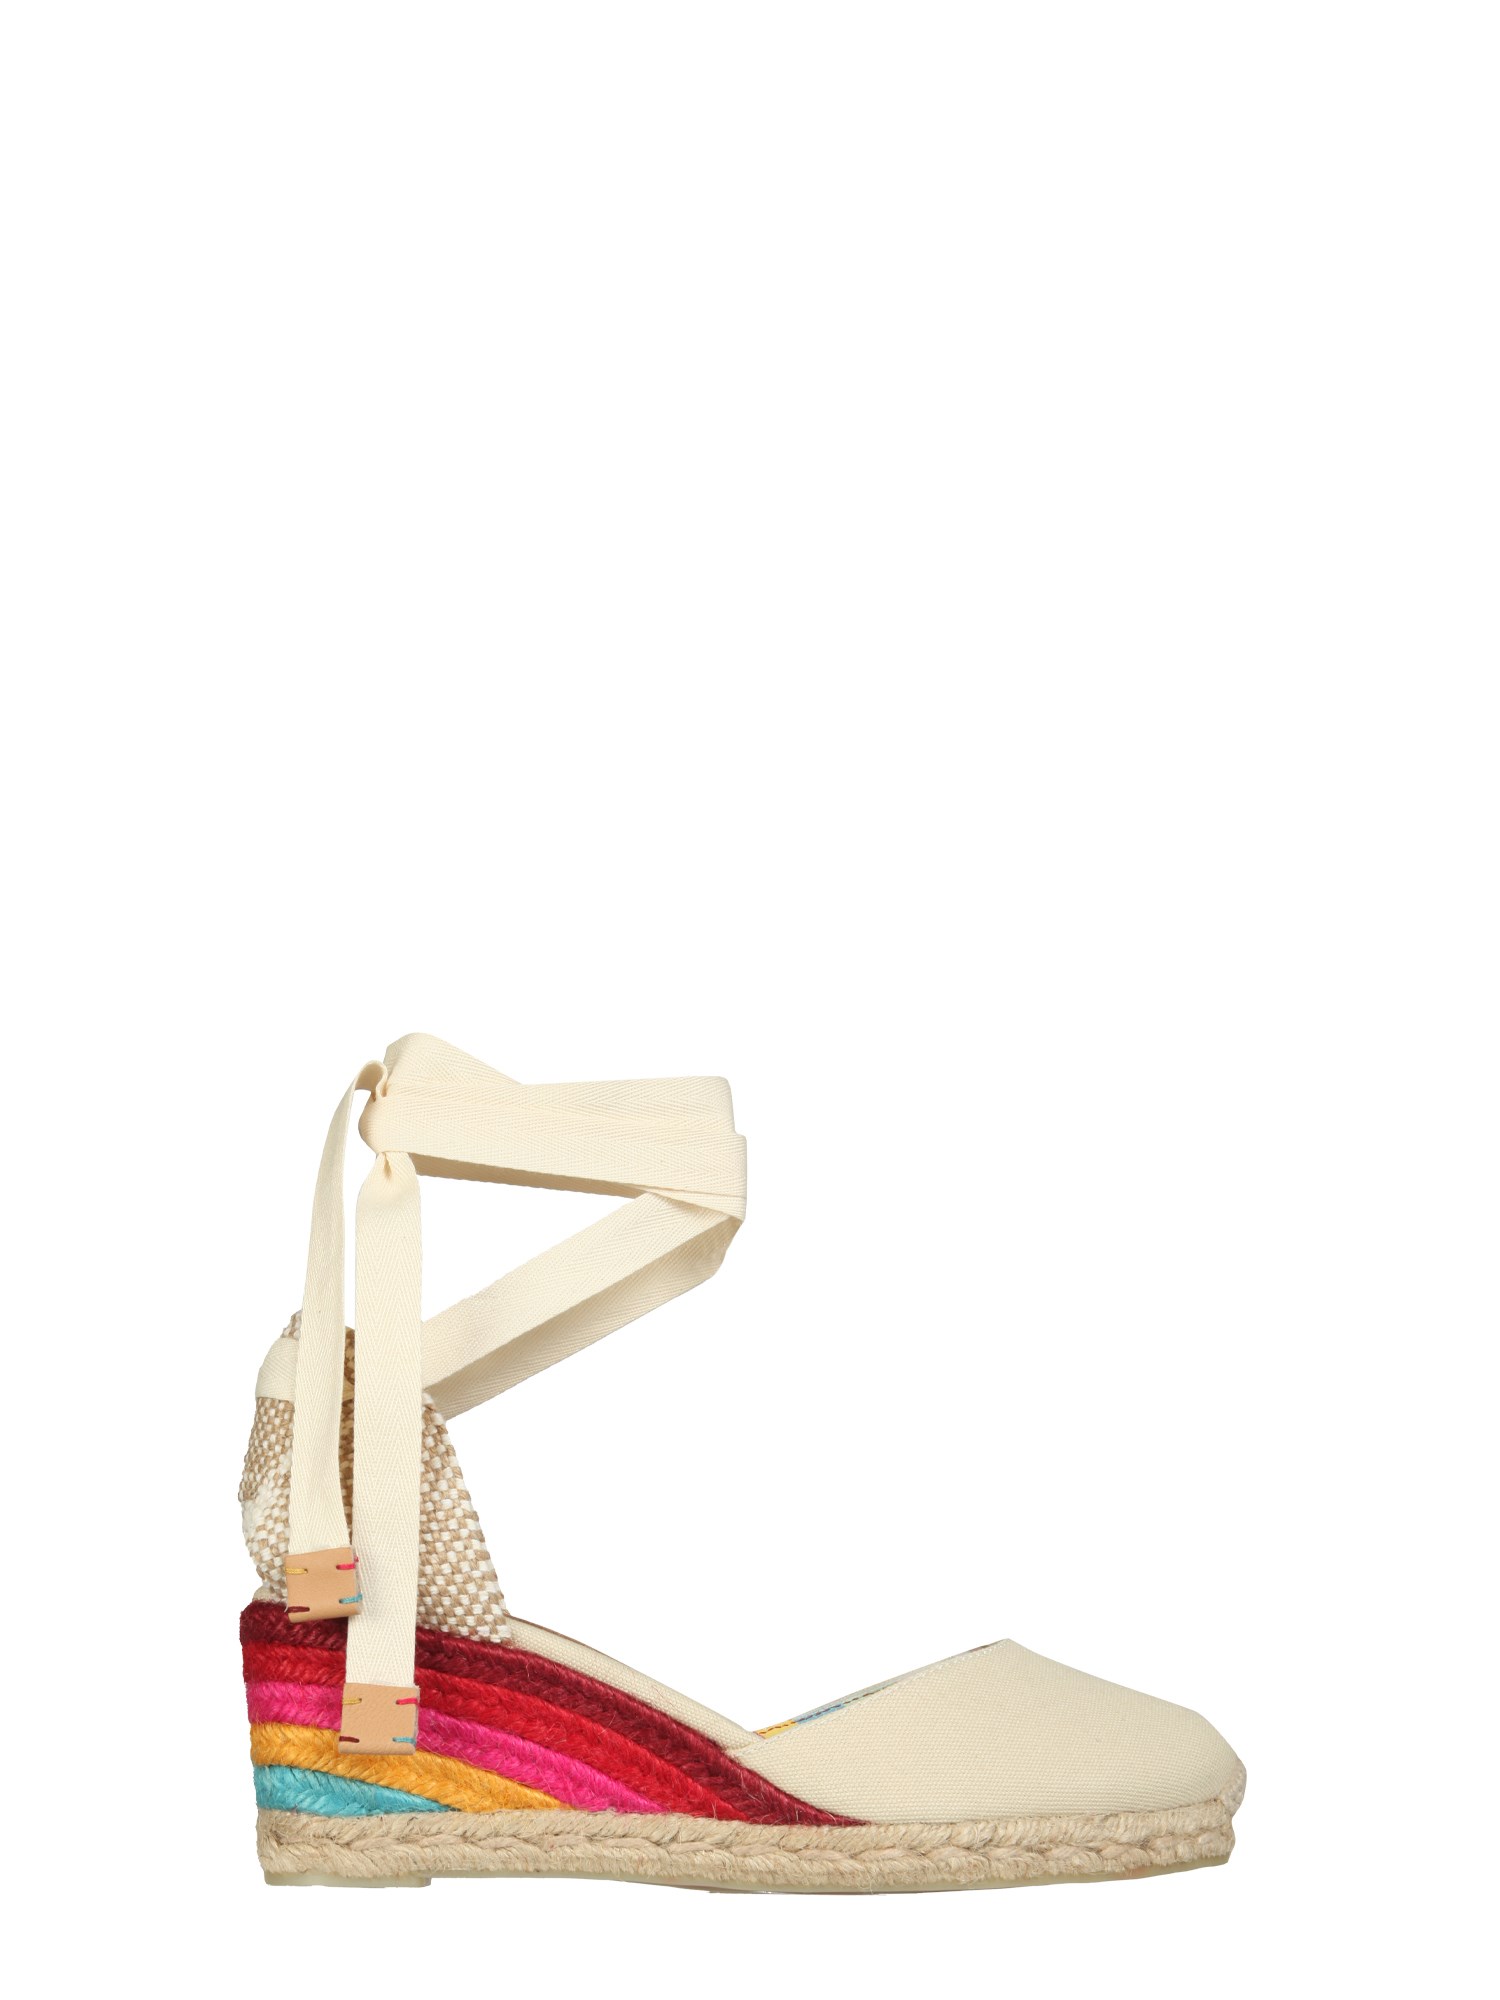 CASTANER BY PAUL SMITH Mid heels "CARINA" WEDGE ESPADRILLES